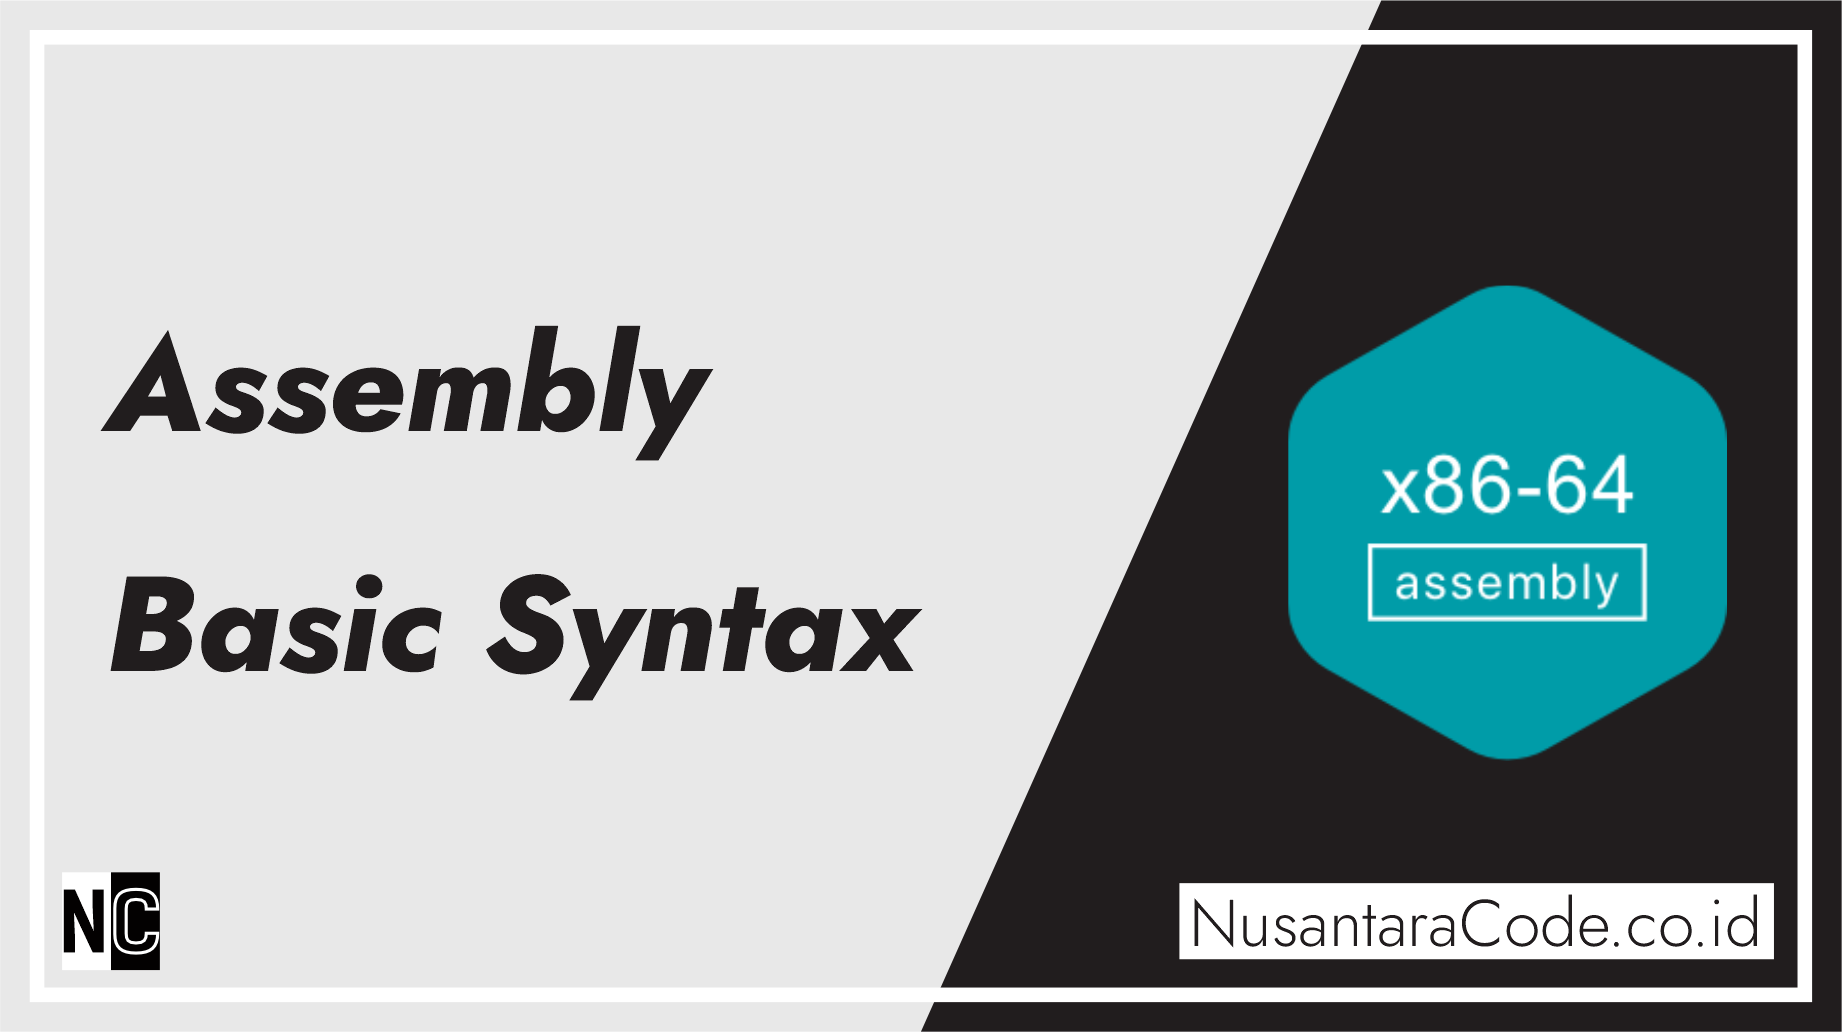 Assembly Basic Syntax